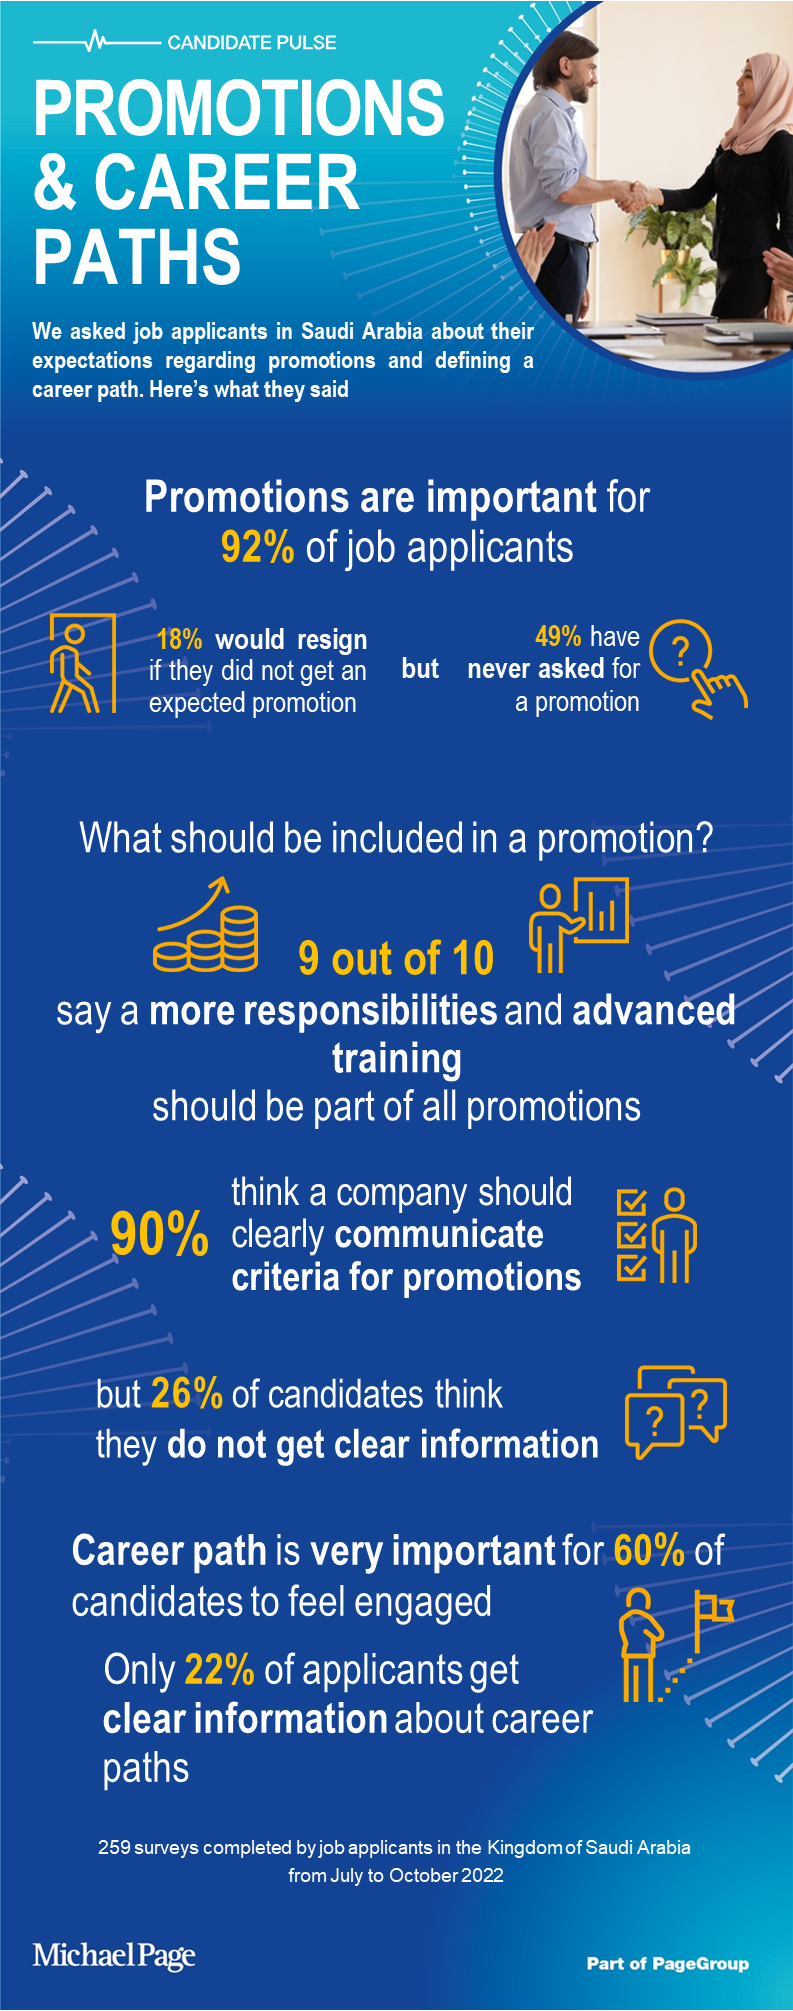 Applicants in Saudi Arabia mention that promotions are important.